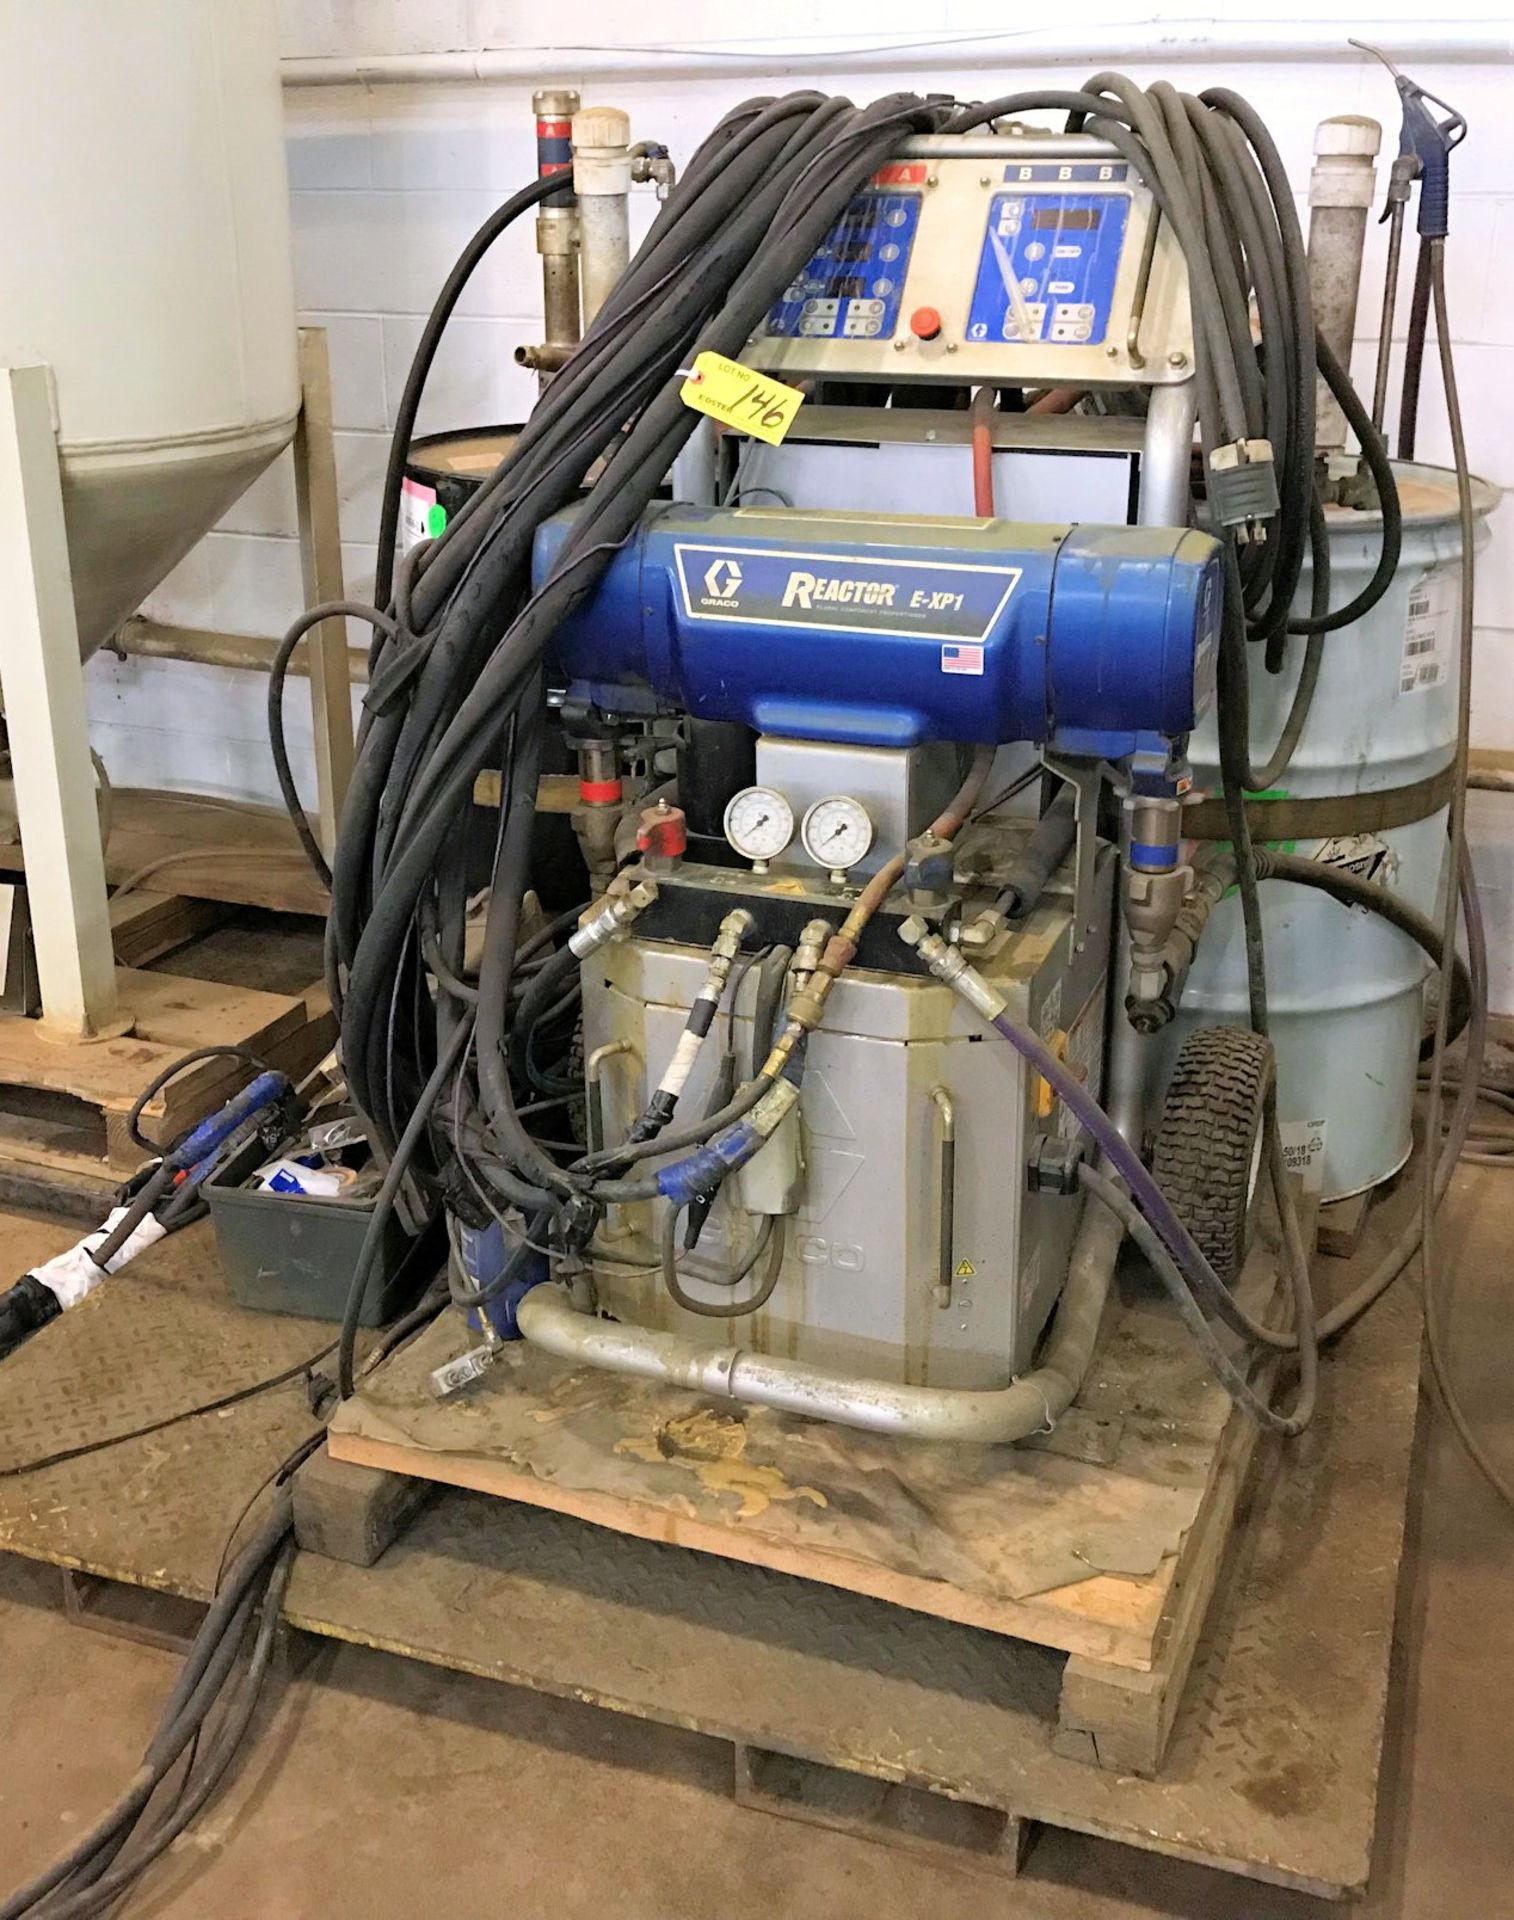 GRACO REACTOR E-XP1, PLURAL COMPONENT PROPORTIONER, FORMERLY USED FOR BED LINER APPLICATIONS